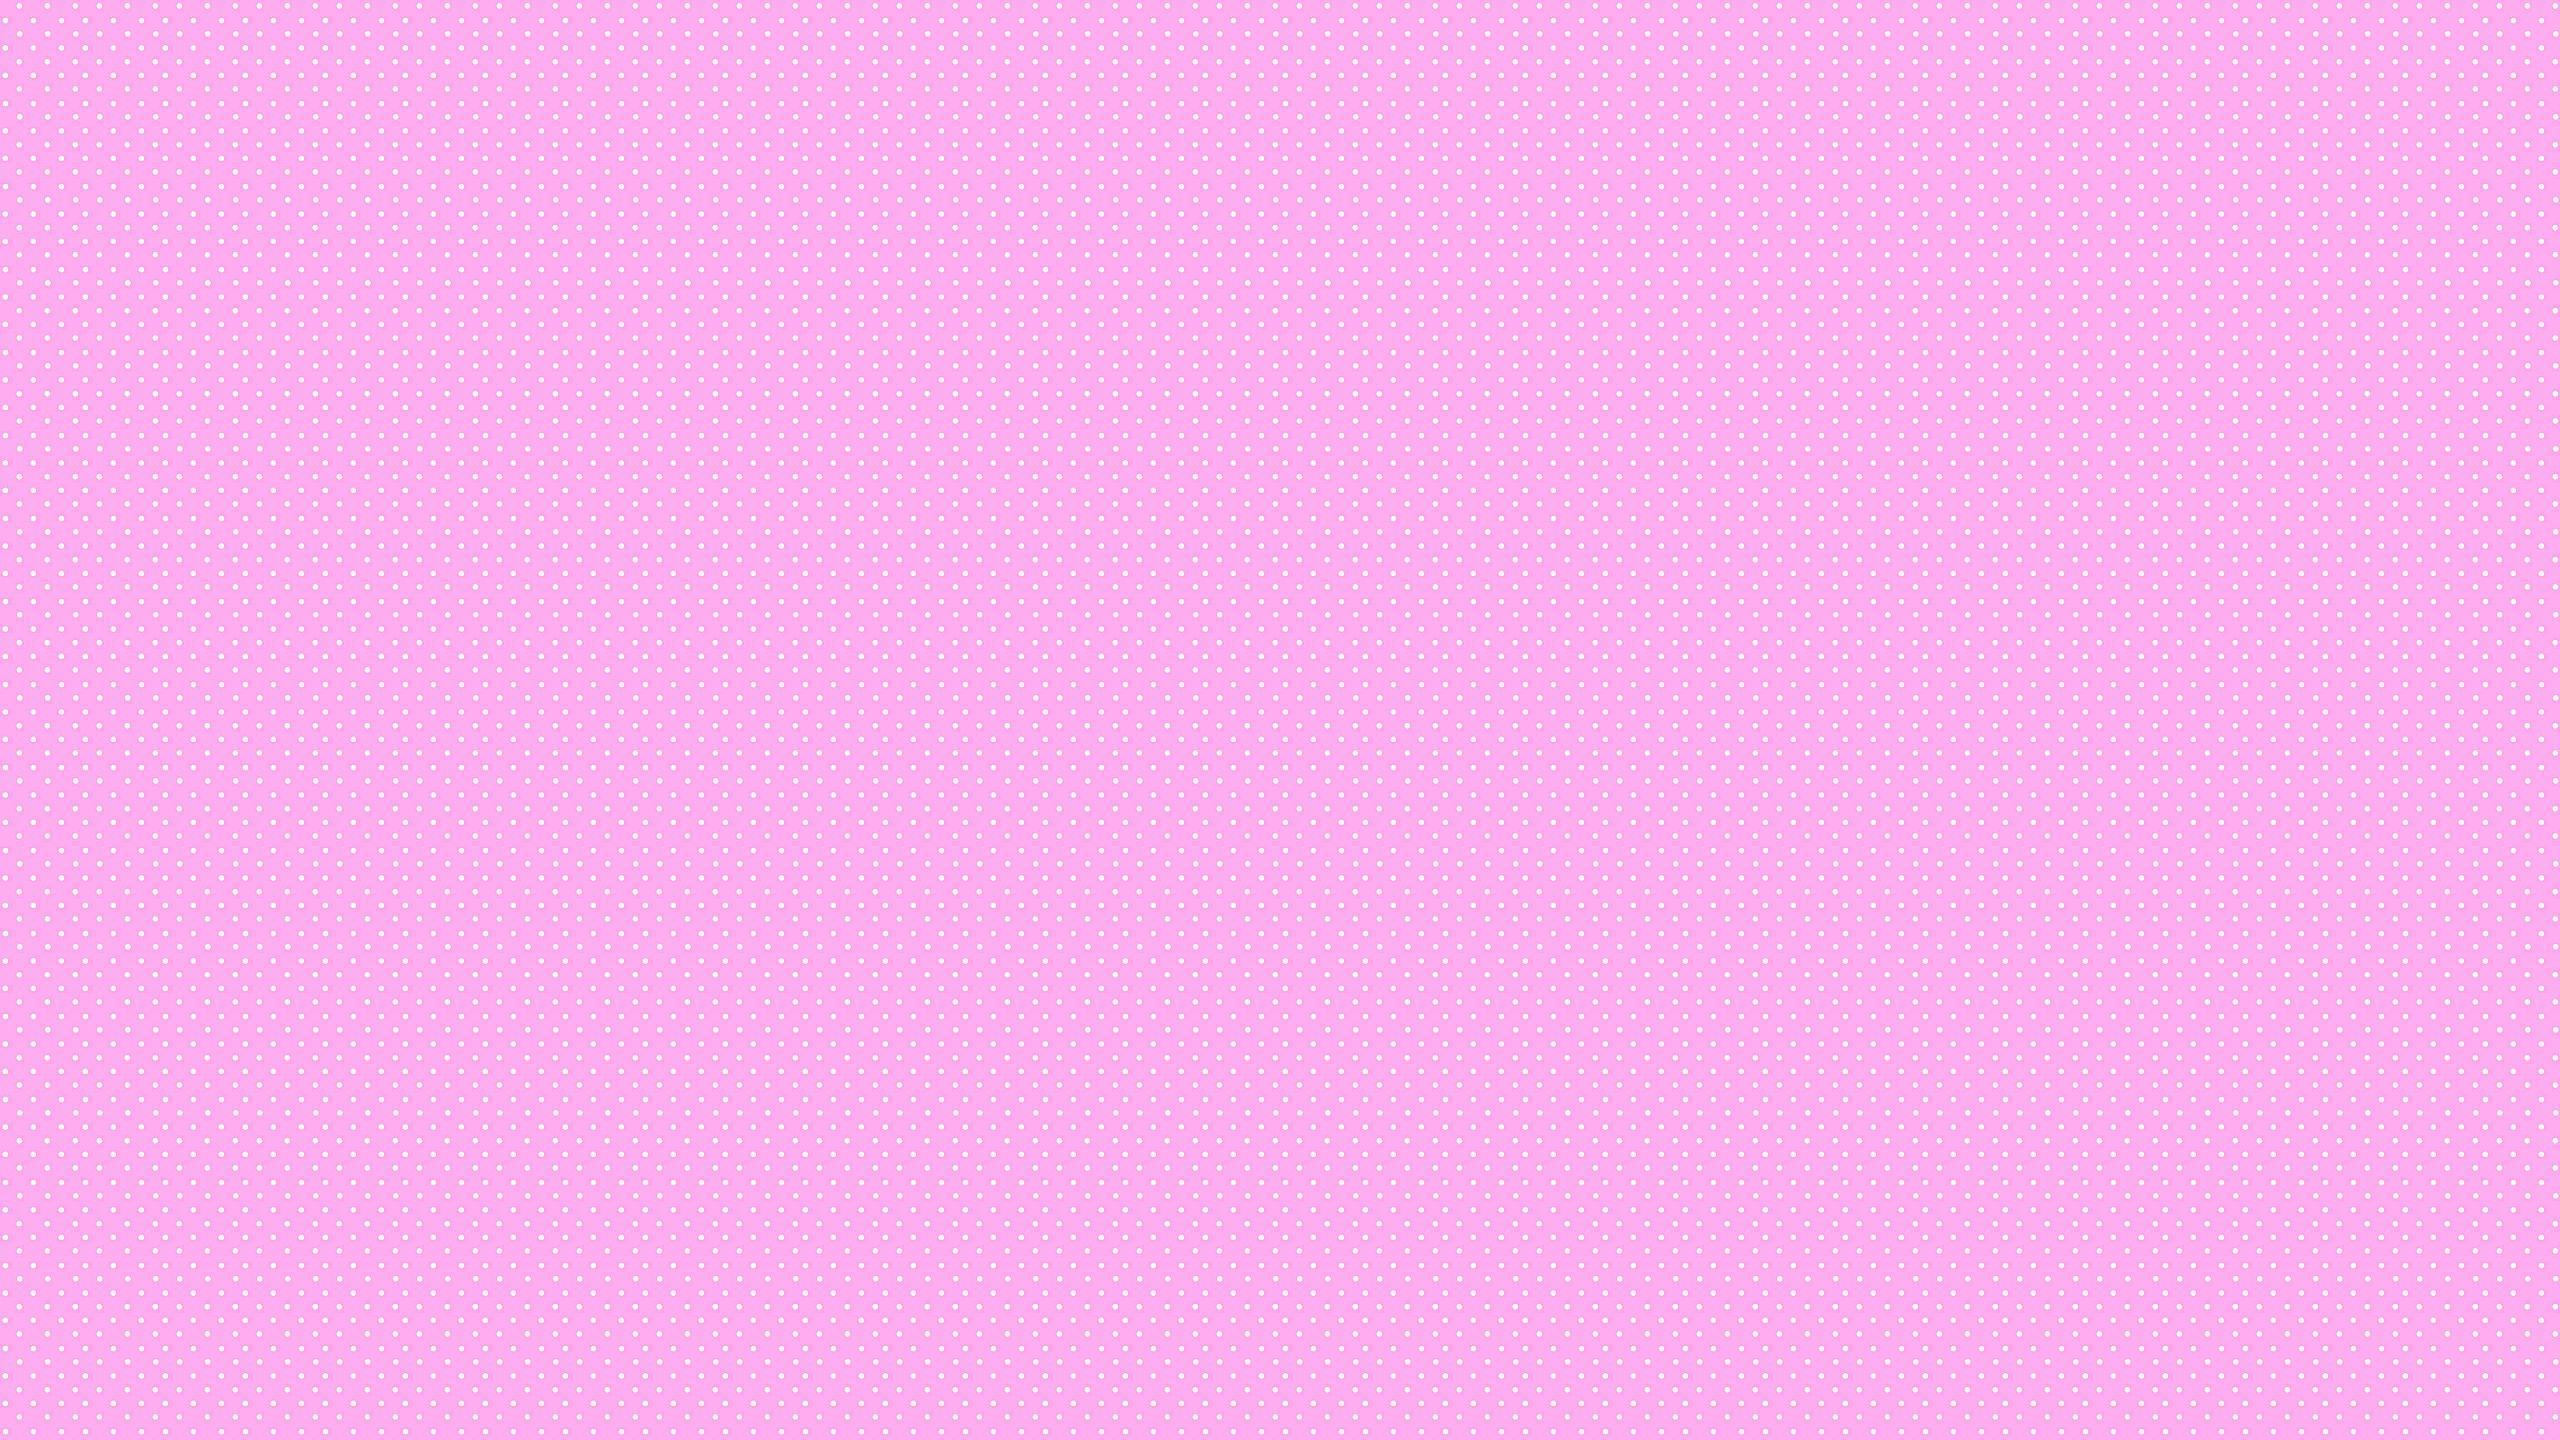 2560 x 1440 · jpeg - Pink Aesthetic Wallpapers - Wallpaper Cave